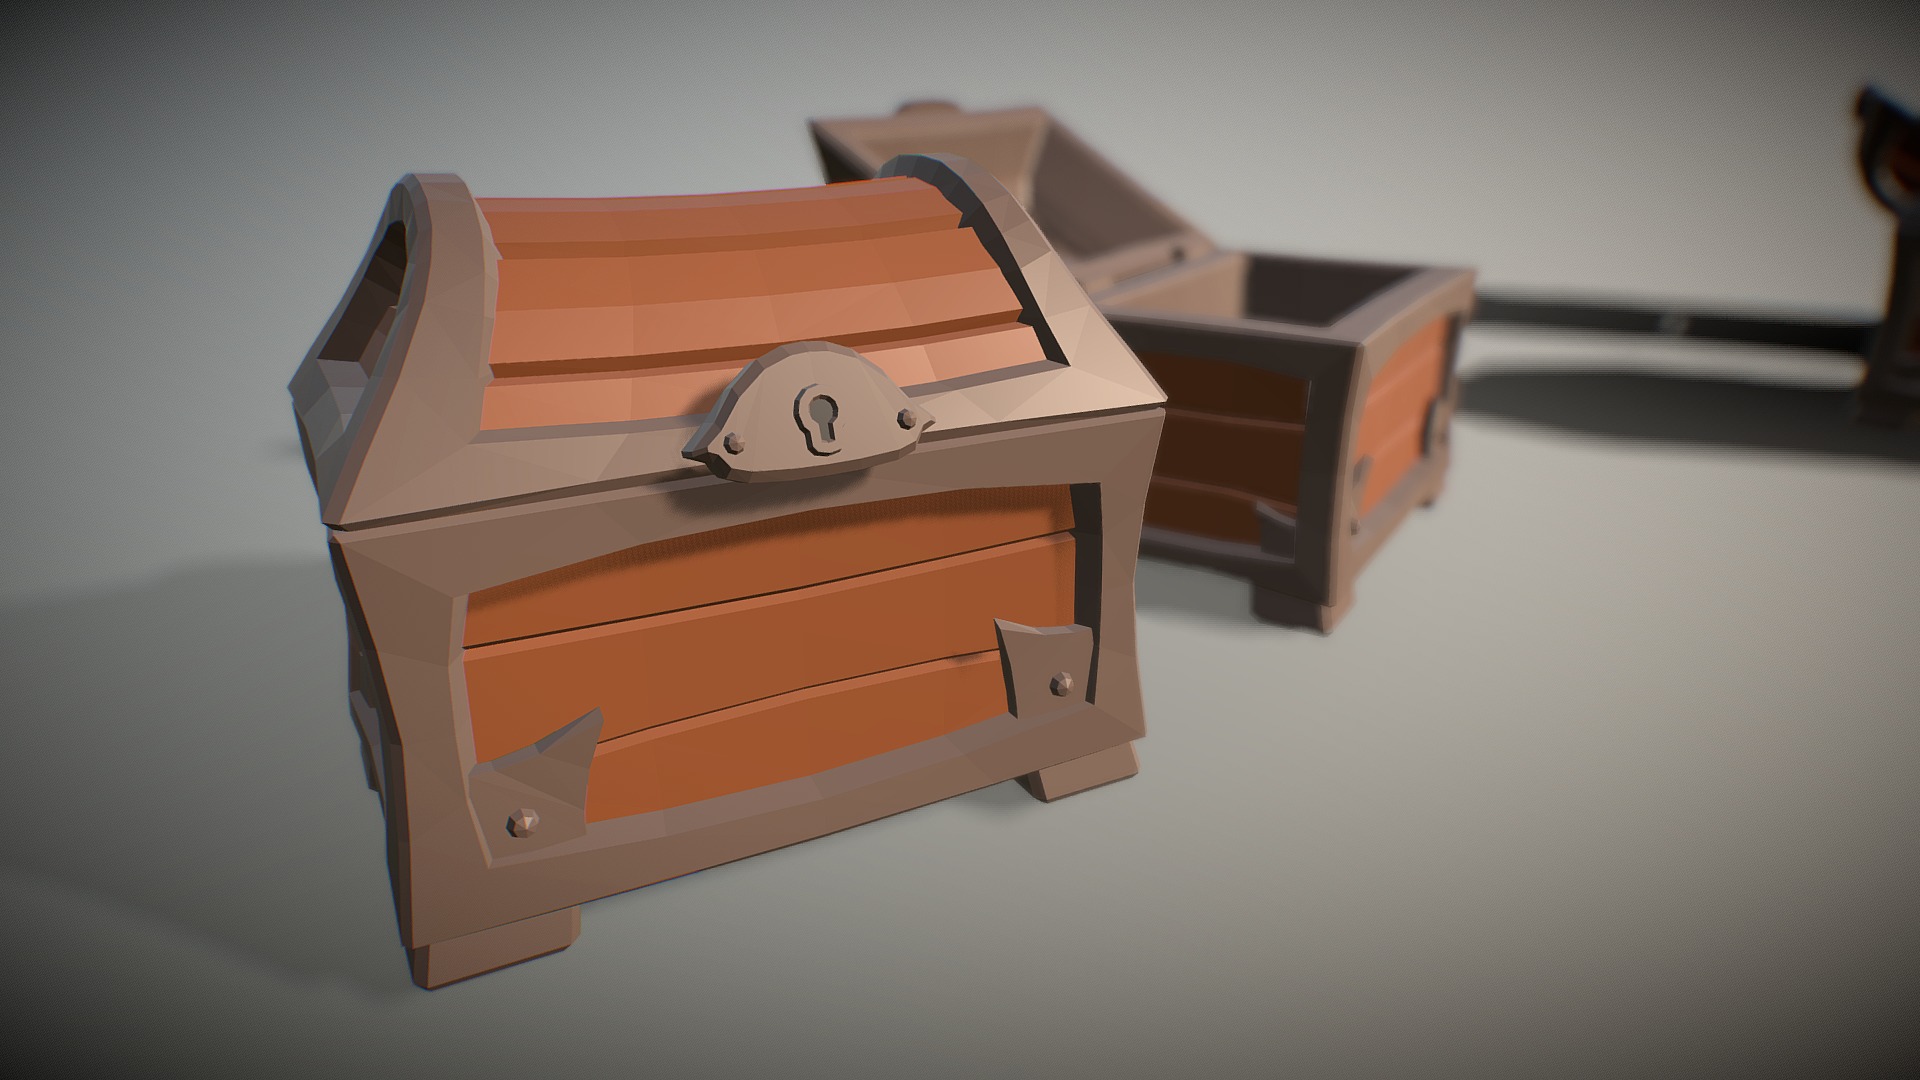 3D model Treasure Chest 1 – Low Poly - This is a 3D model of the Treasure Chest 1 - Low Poly. The 3D model is about a box with a hole in it.